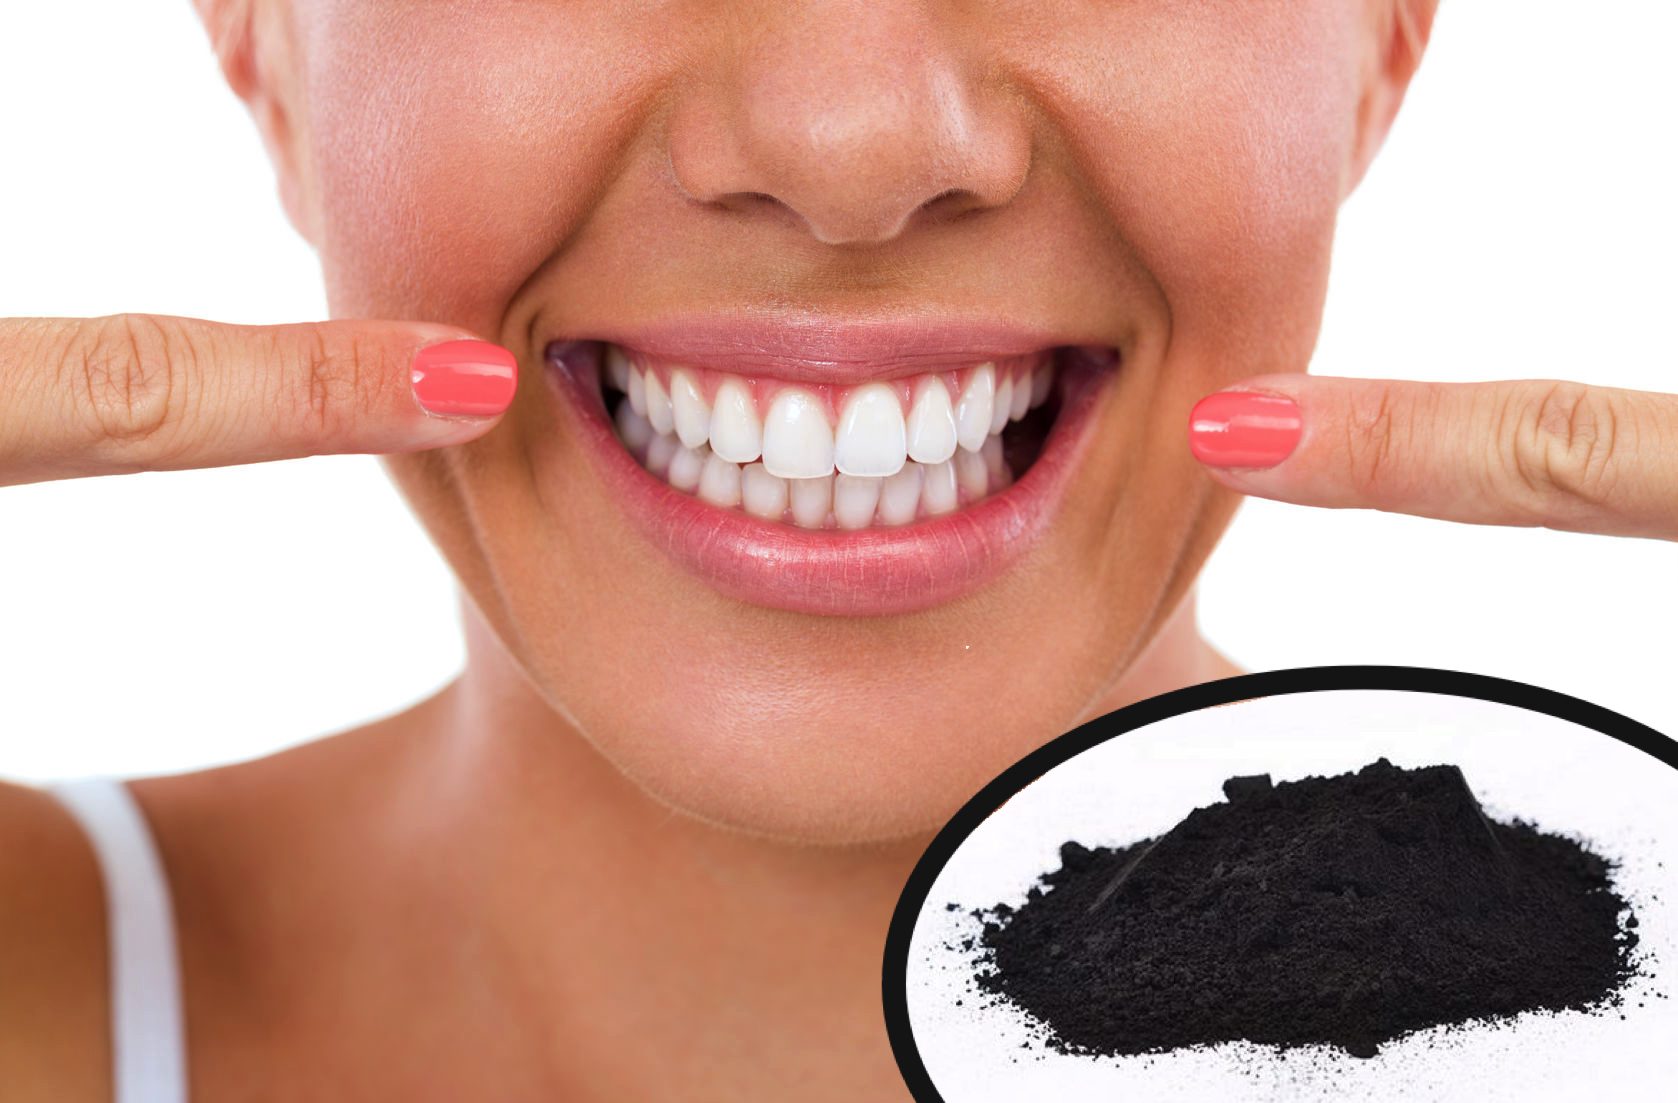 Charcoal for teeth whitening